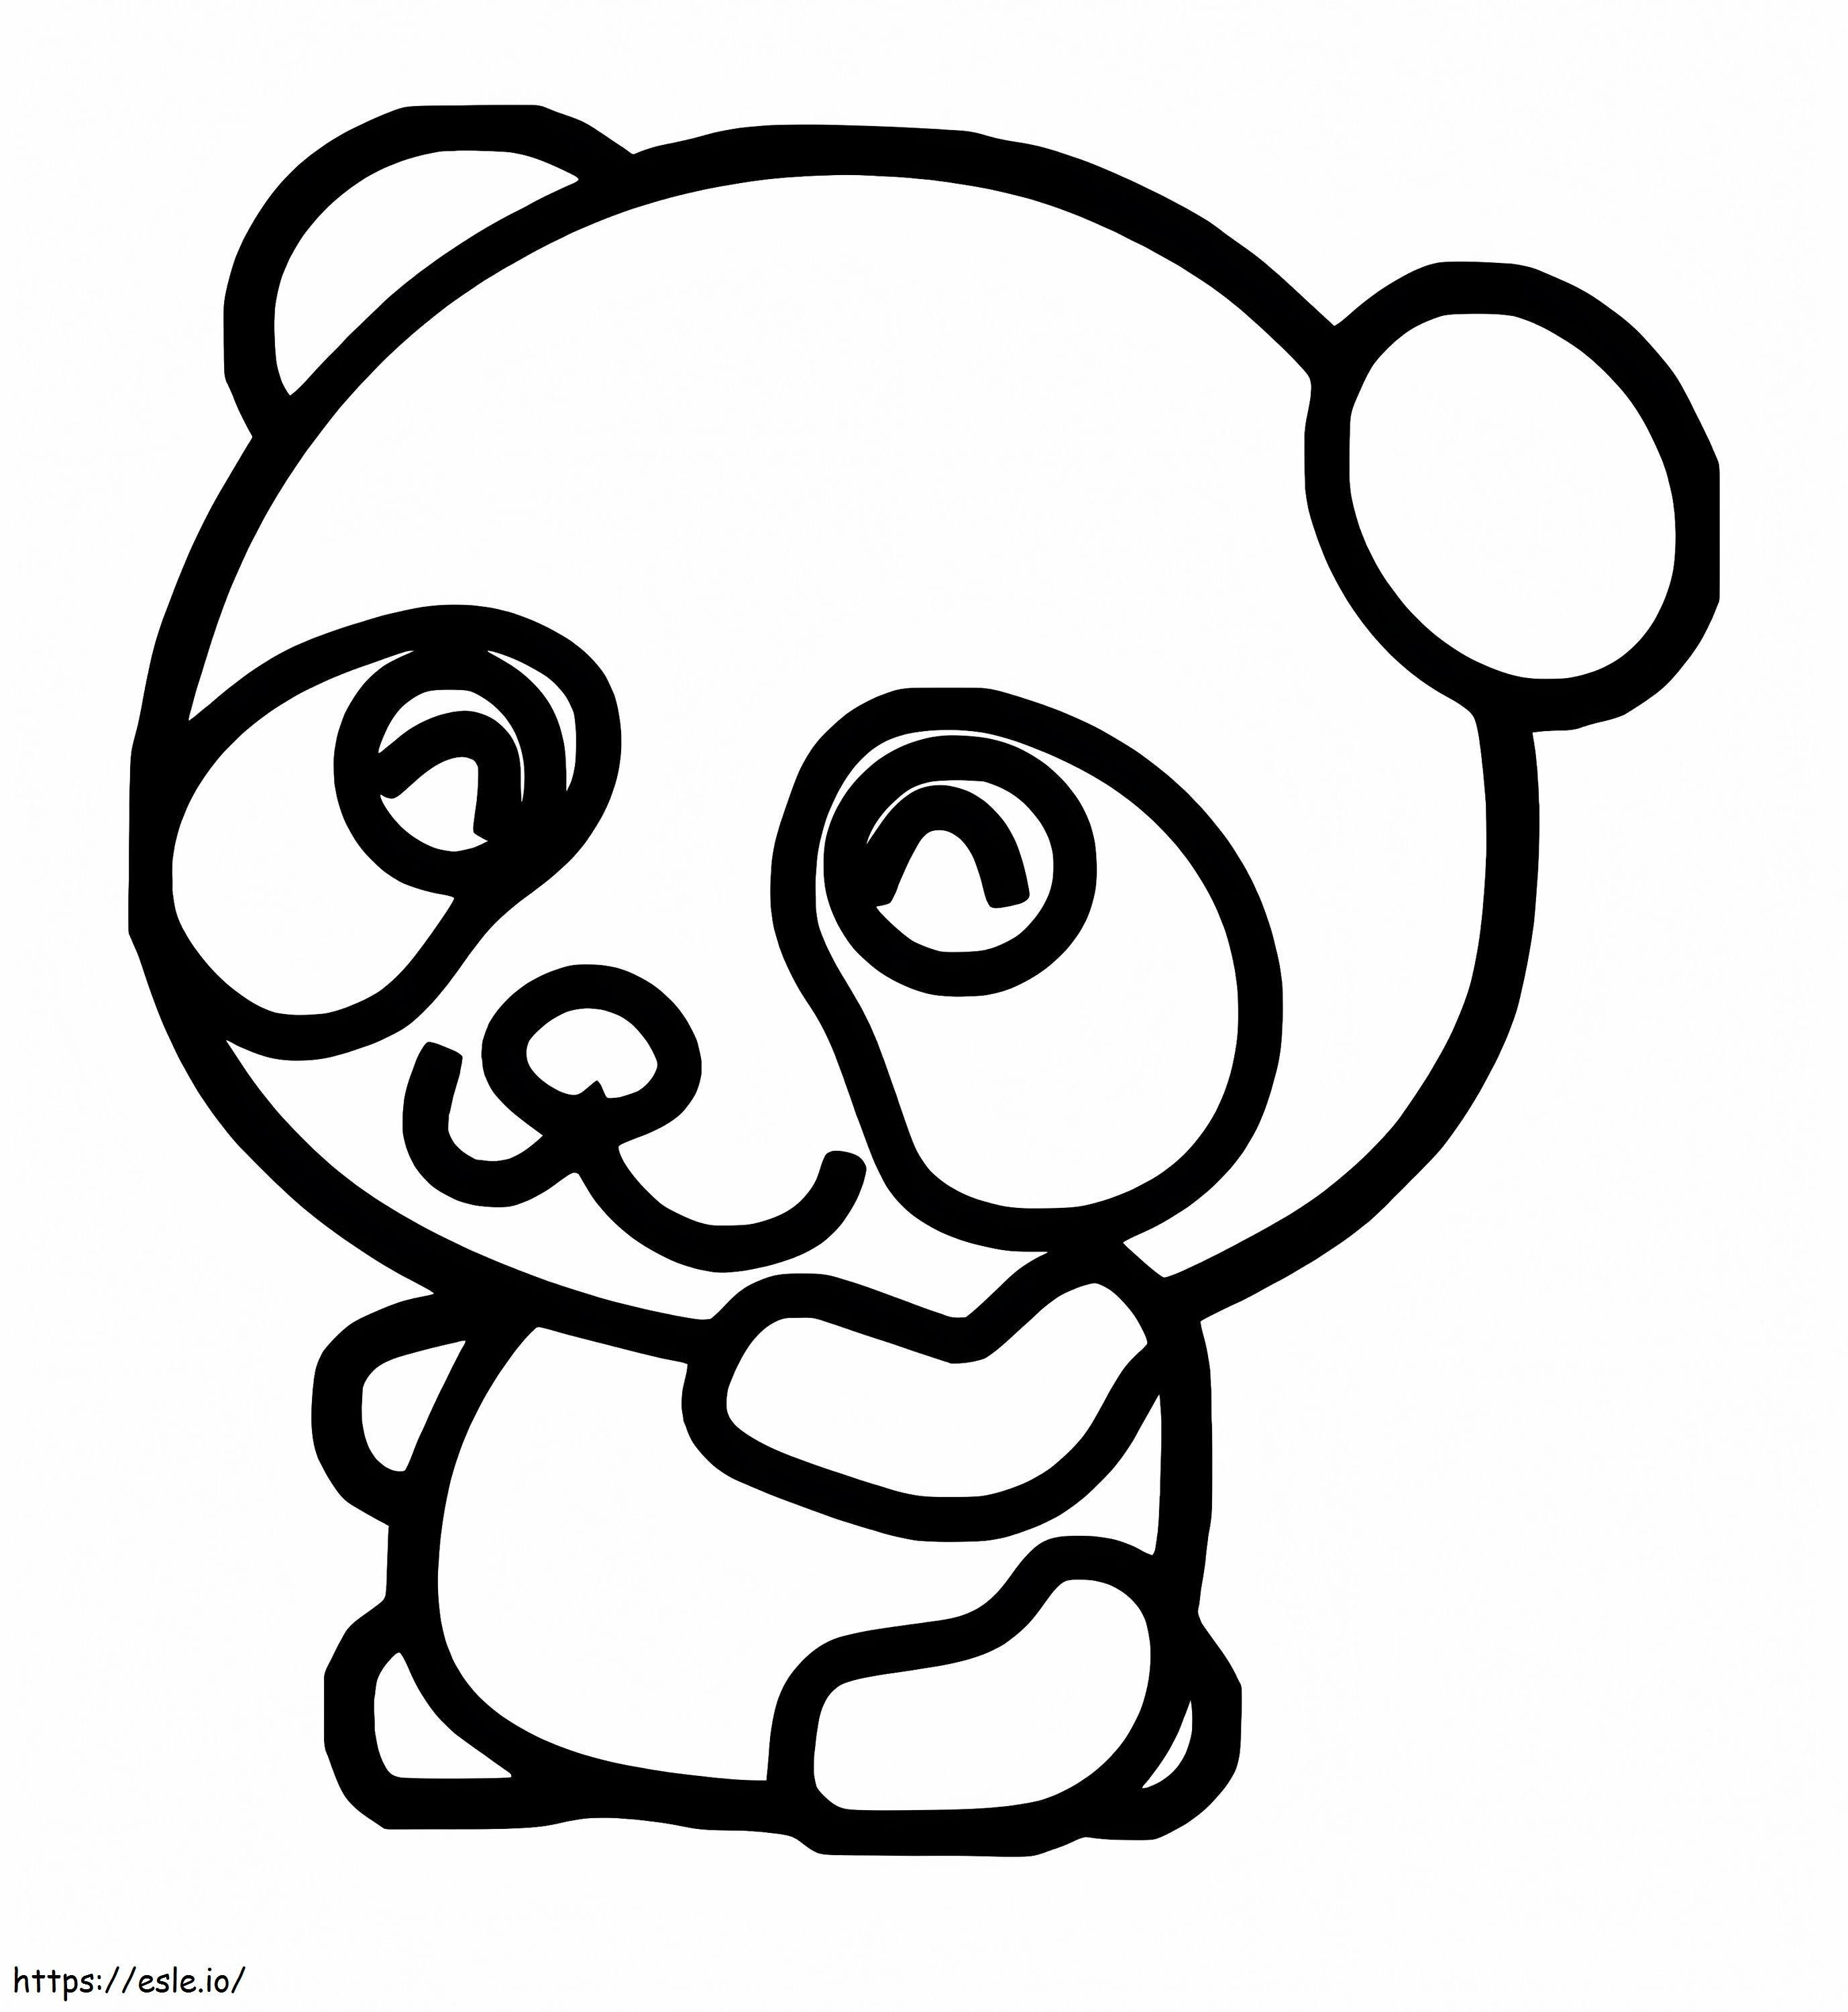 Drawing The Little Panda coloring page